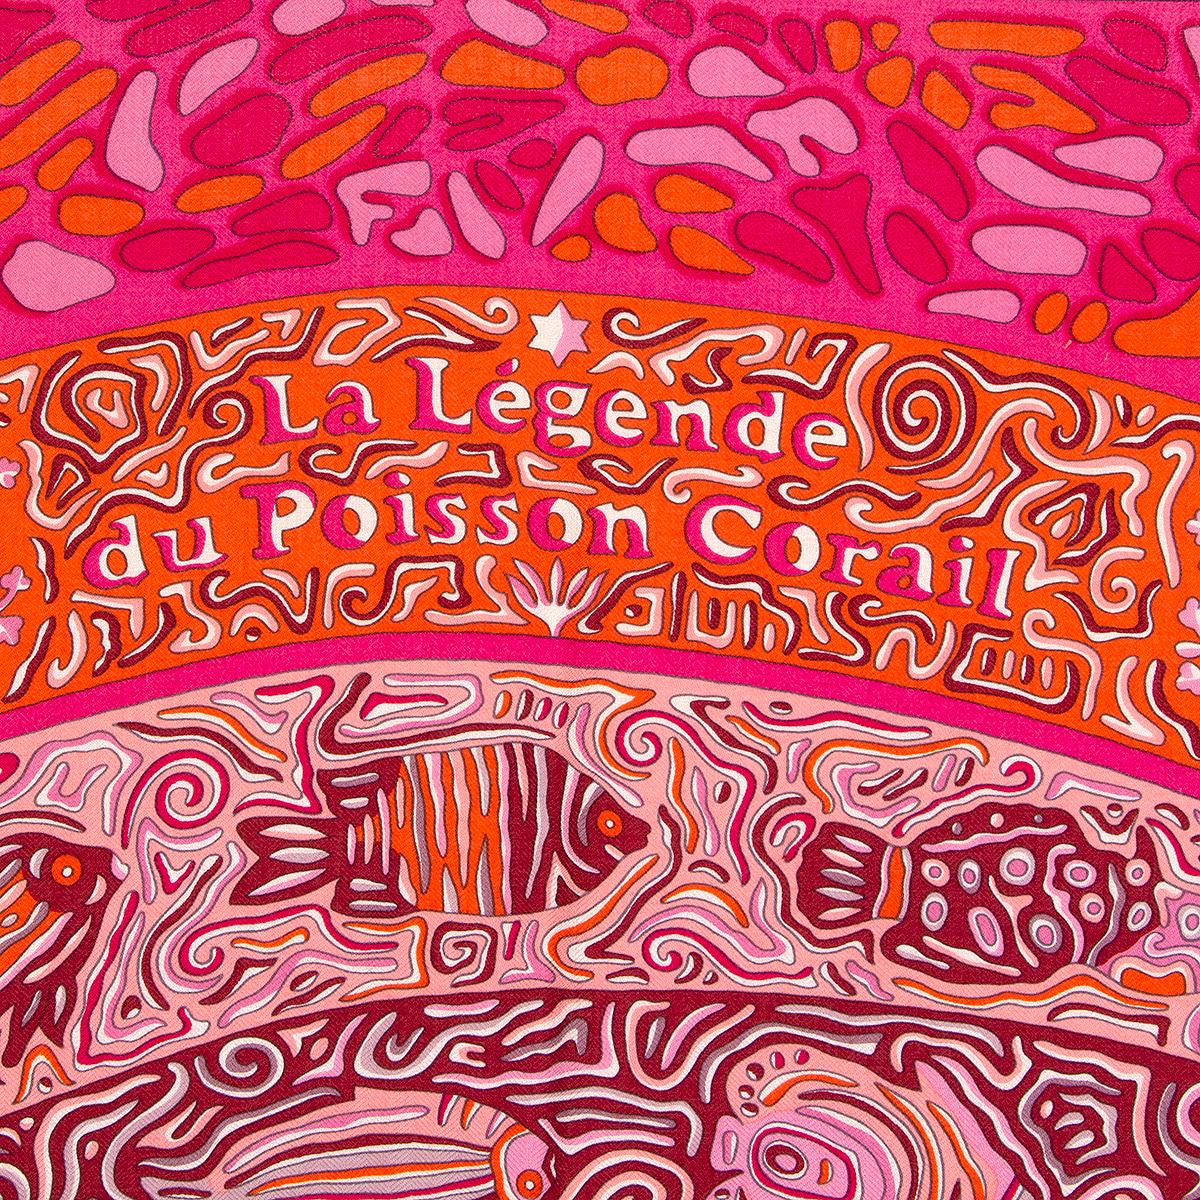 Hermes 'La Legende du Poisson Corail 140' shawl by Christine Henry in pink cashmere (65%) and silk (35) with burgundy border and details in orange, white and various shades of pink. Has been worn with one small hole - see photos. Overall in